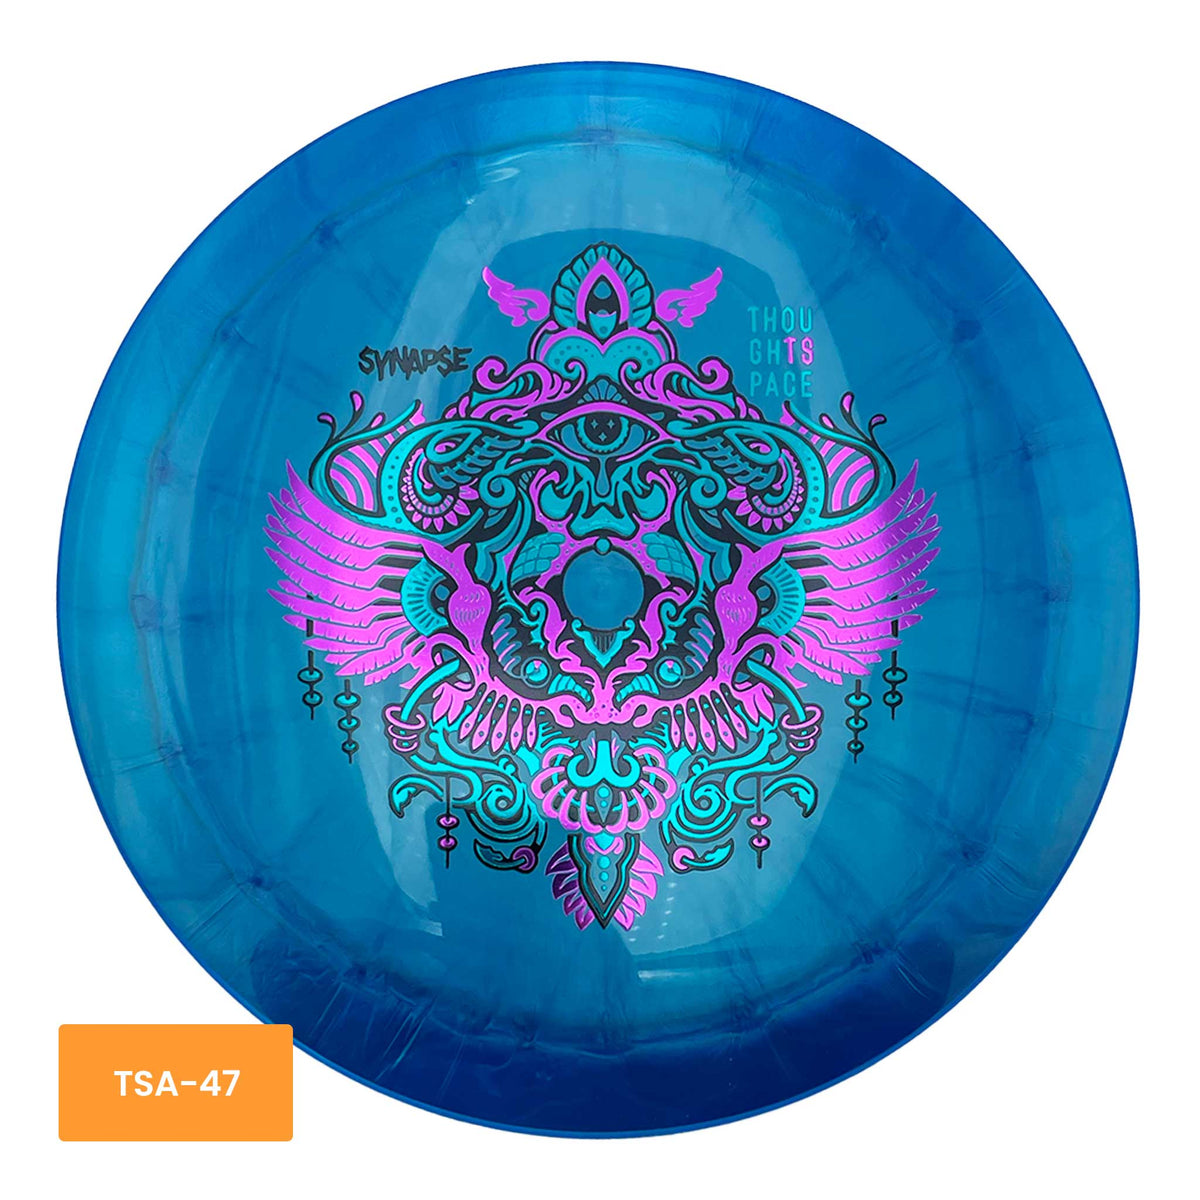 Thought Space Athletics Ethereal Synapse driver - Blue / Purple